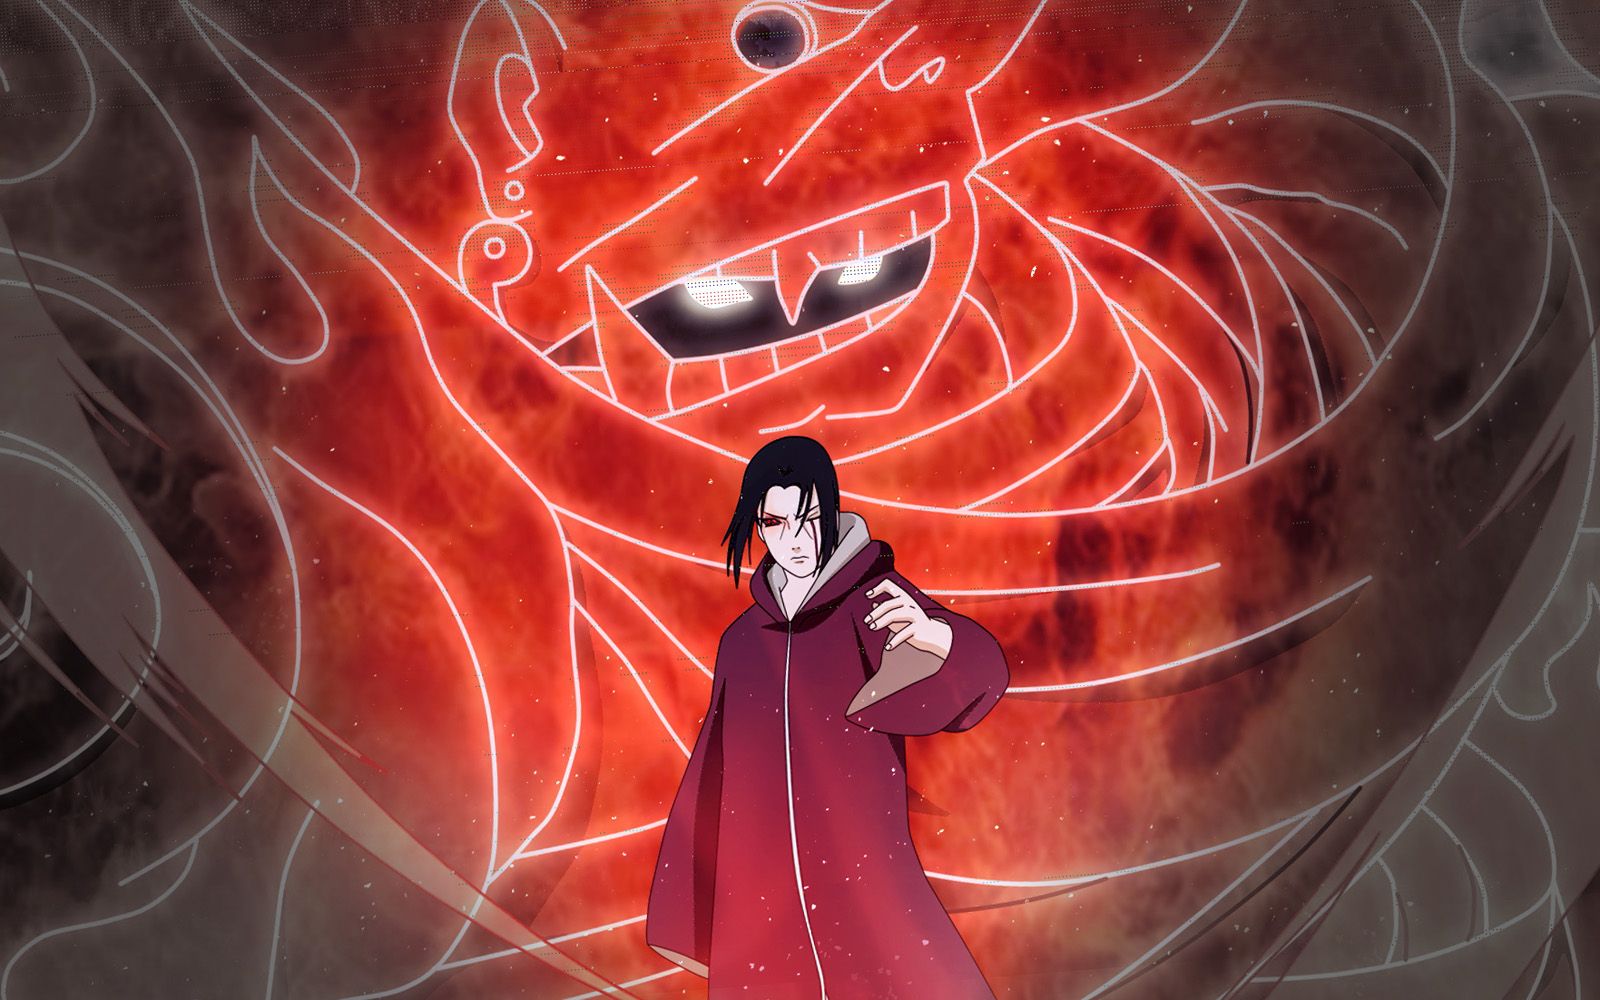 75 Itachi Susanoo Wallpaper On Wallpapersafari Search free susanoo wallpapers on zedge and personalize your phone to suit you. itachi susanoo wallpaper on wallpapersafari